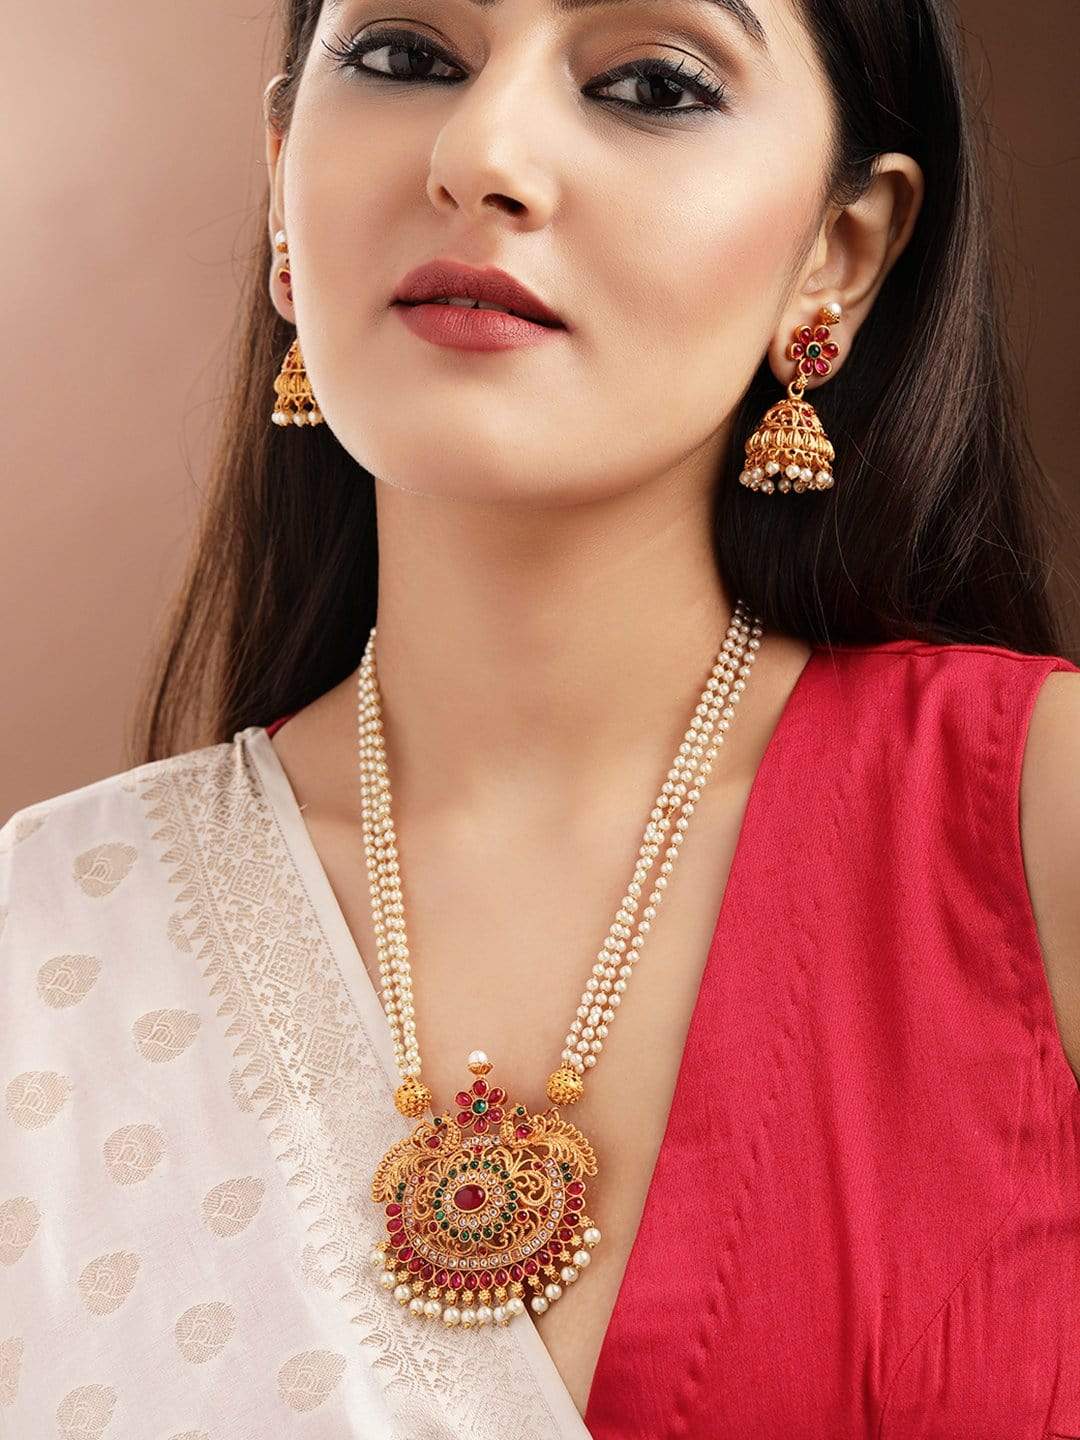 Rubans 24K gold plated pendant necklace set with pearls.